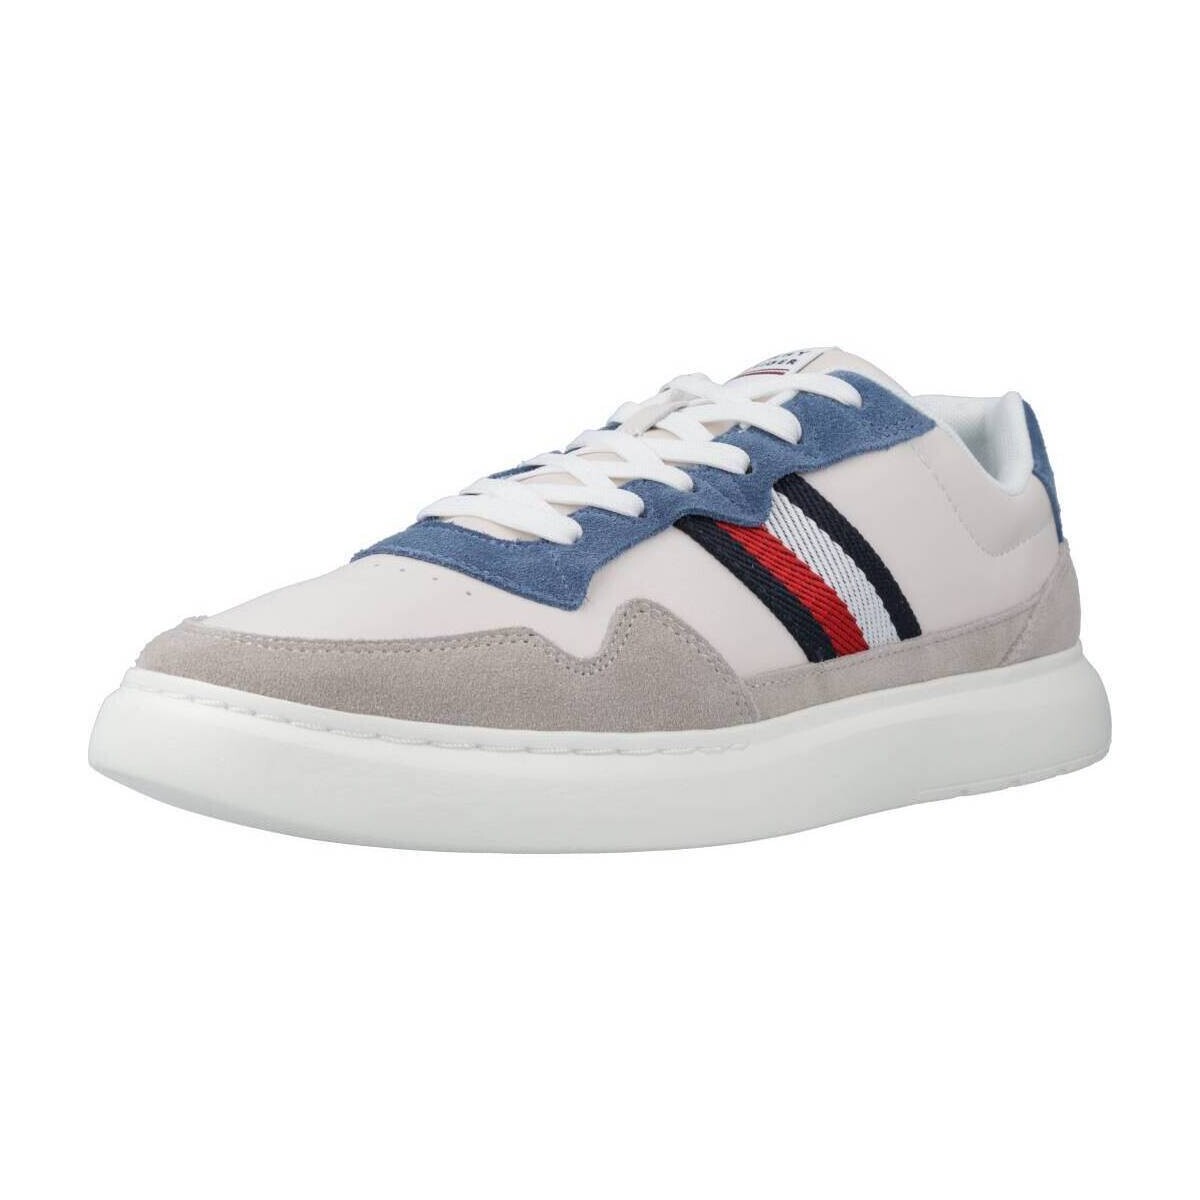 Sneakers Tommy Hilfiger LIGHTWEIGHT LEATHER MIX Grey